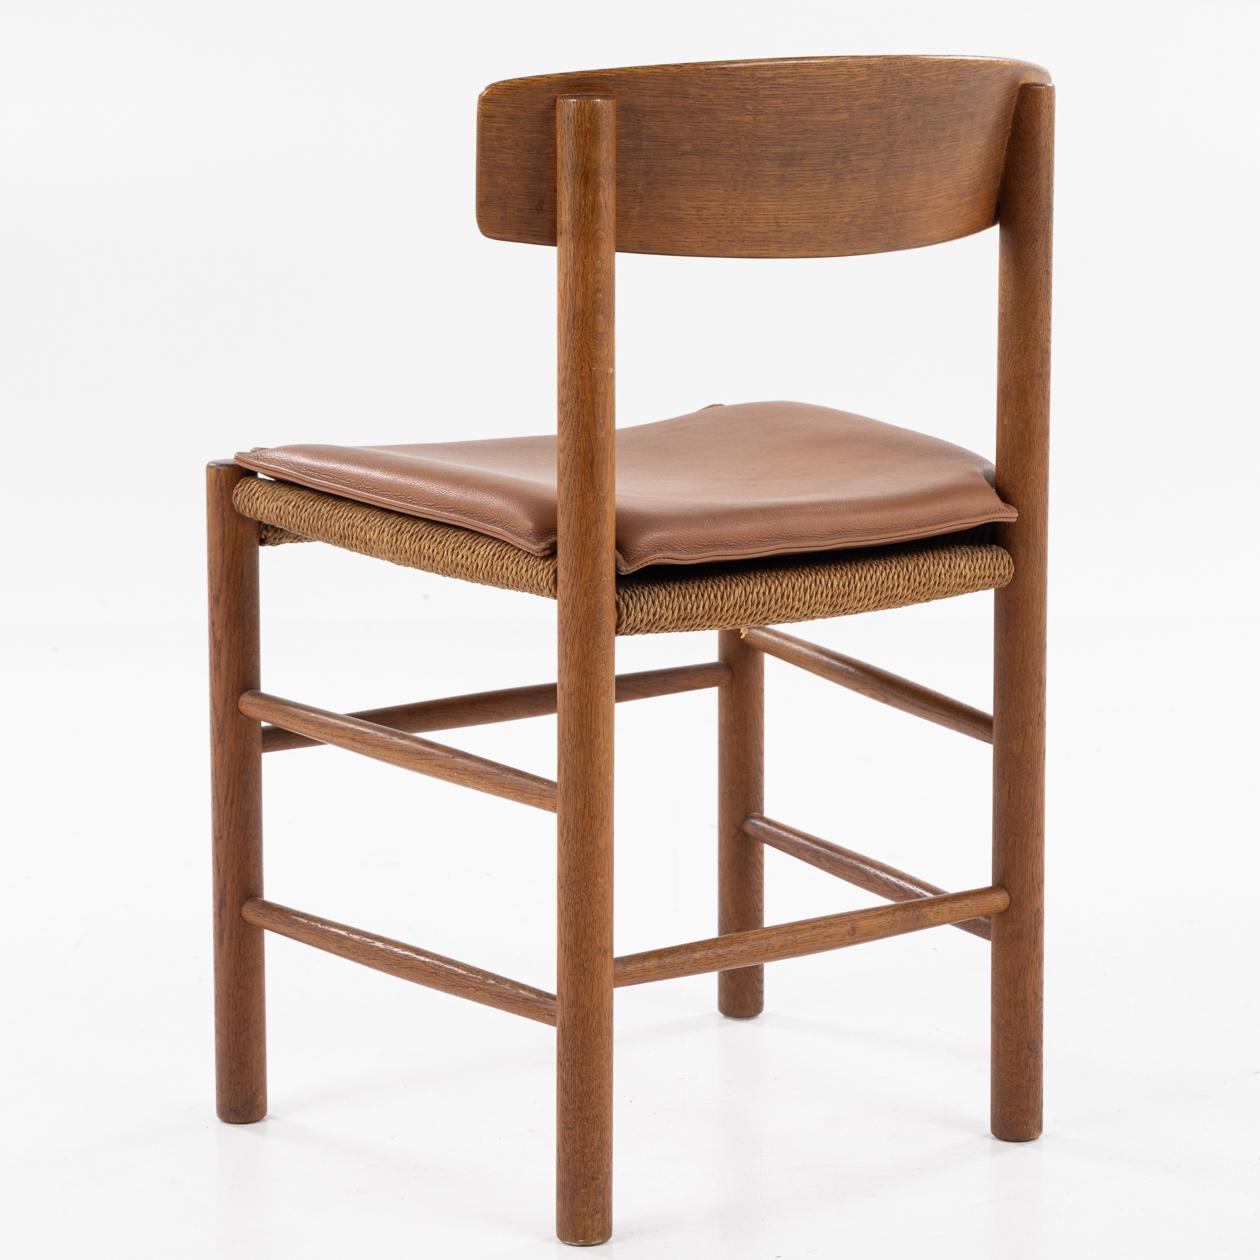 Danish Set of four J 39 - Dining chairs in patinated oak by Børge Mogensen